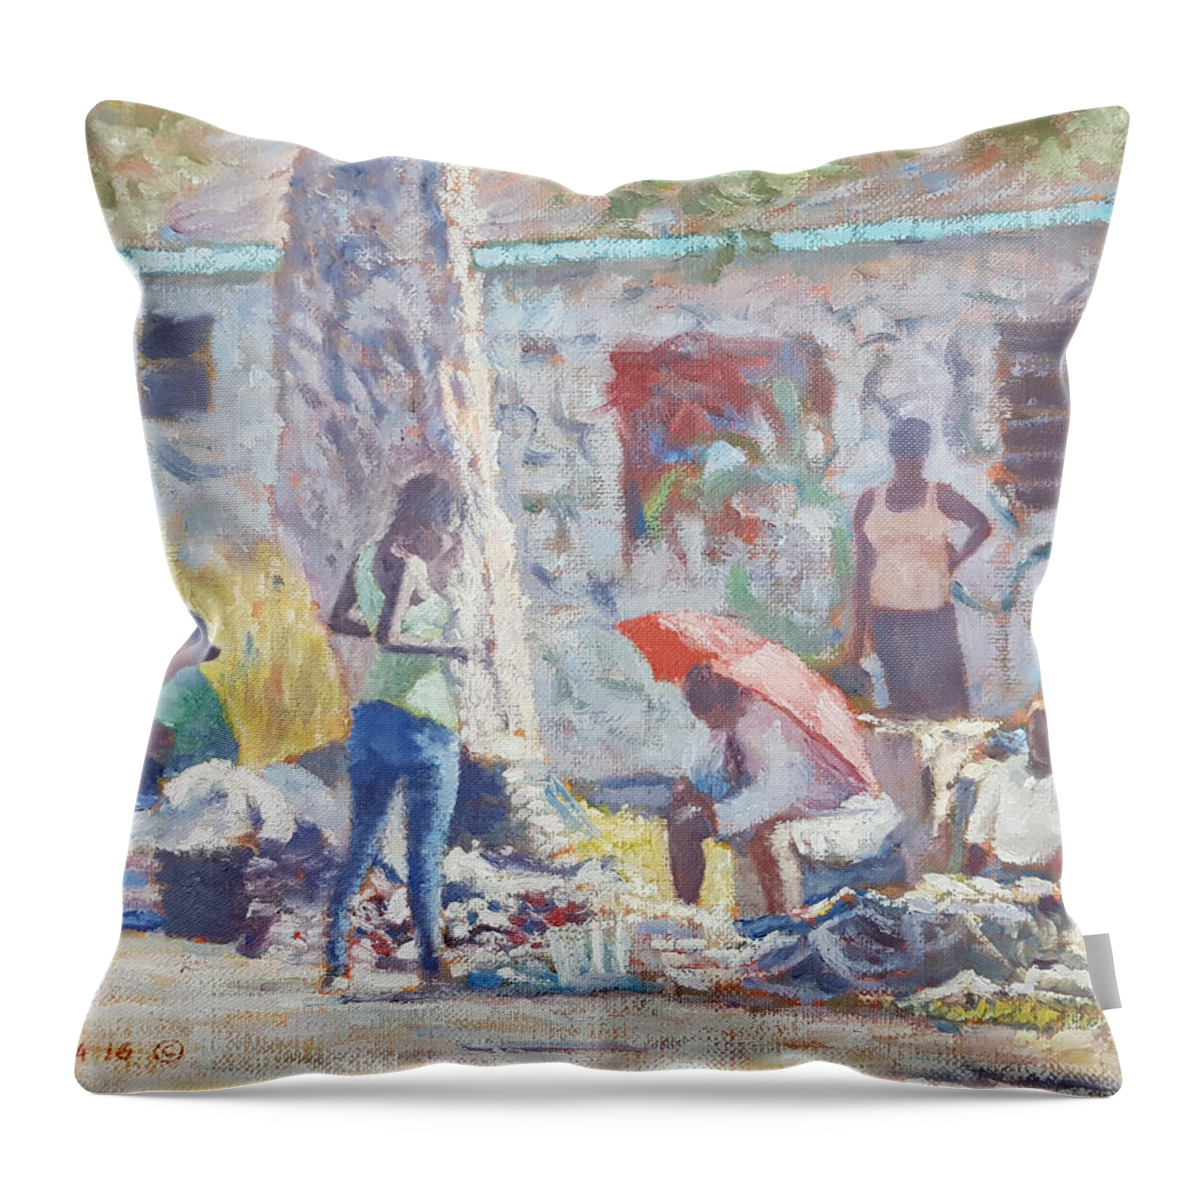 Market Day Throw Pillow featuring the painting Market Day by Ritchie Eyma